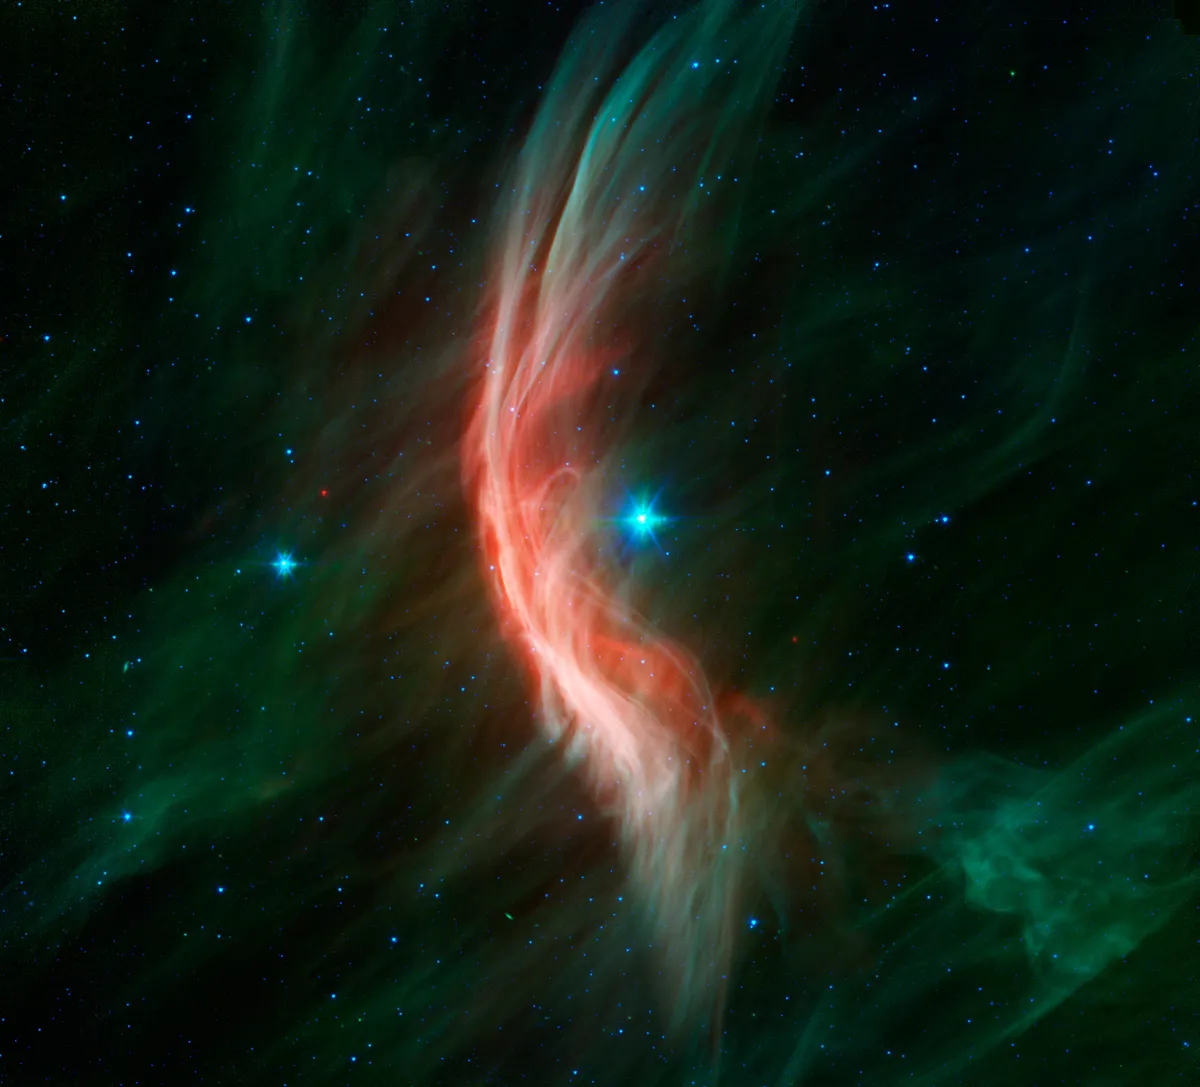 Zeta Ophiuchi Massive stellar winds from giant star Zeta (z)Ophiuchi cause ripples in its surroundings to generate a spectacular bow shock. Credit: NASA/JPL-Caltech